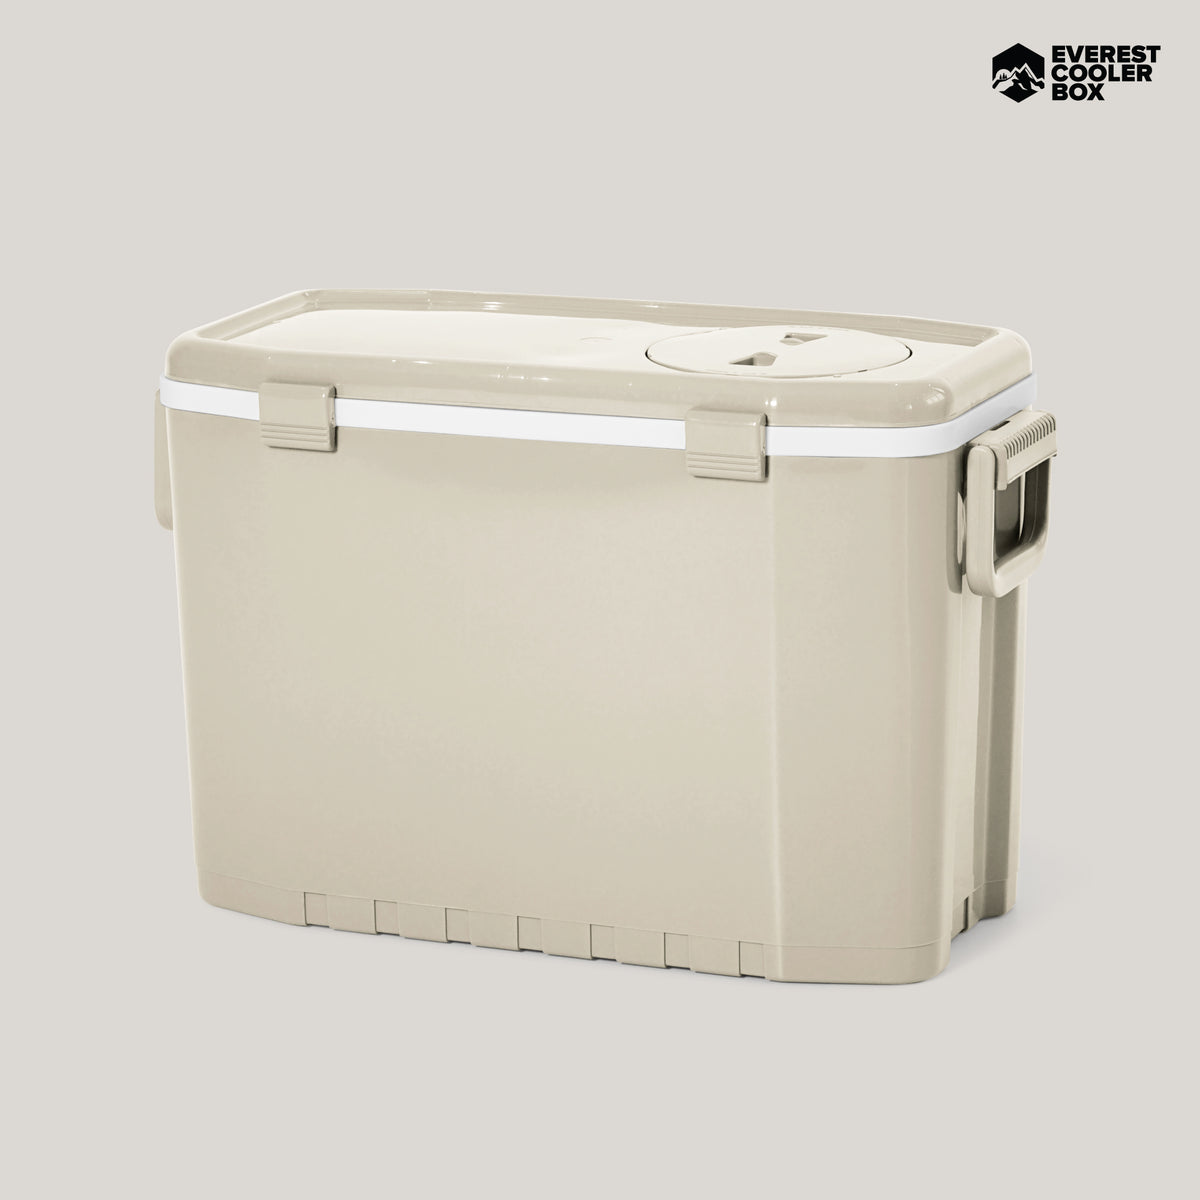 EVEREST Camping Collection Cooler Box 55 Liters AG994